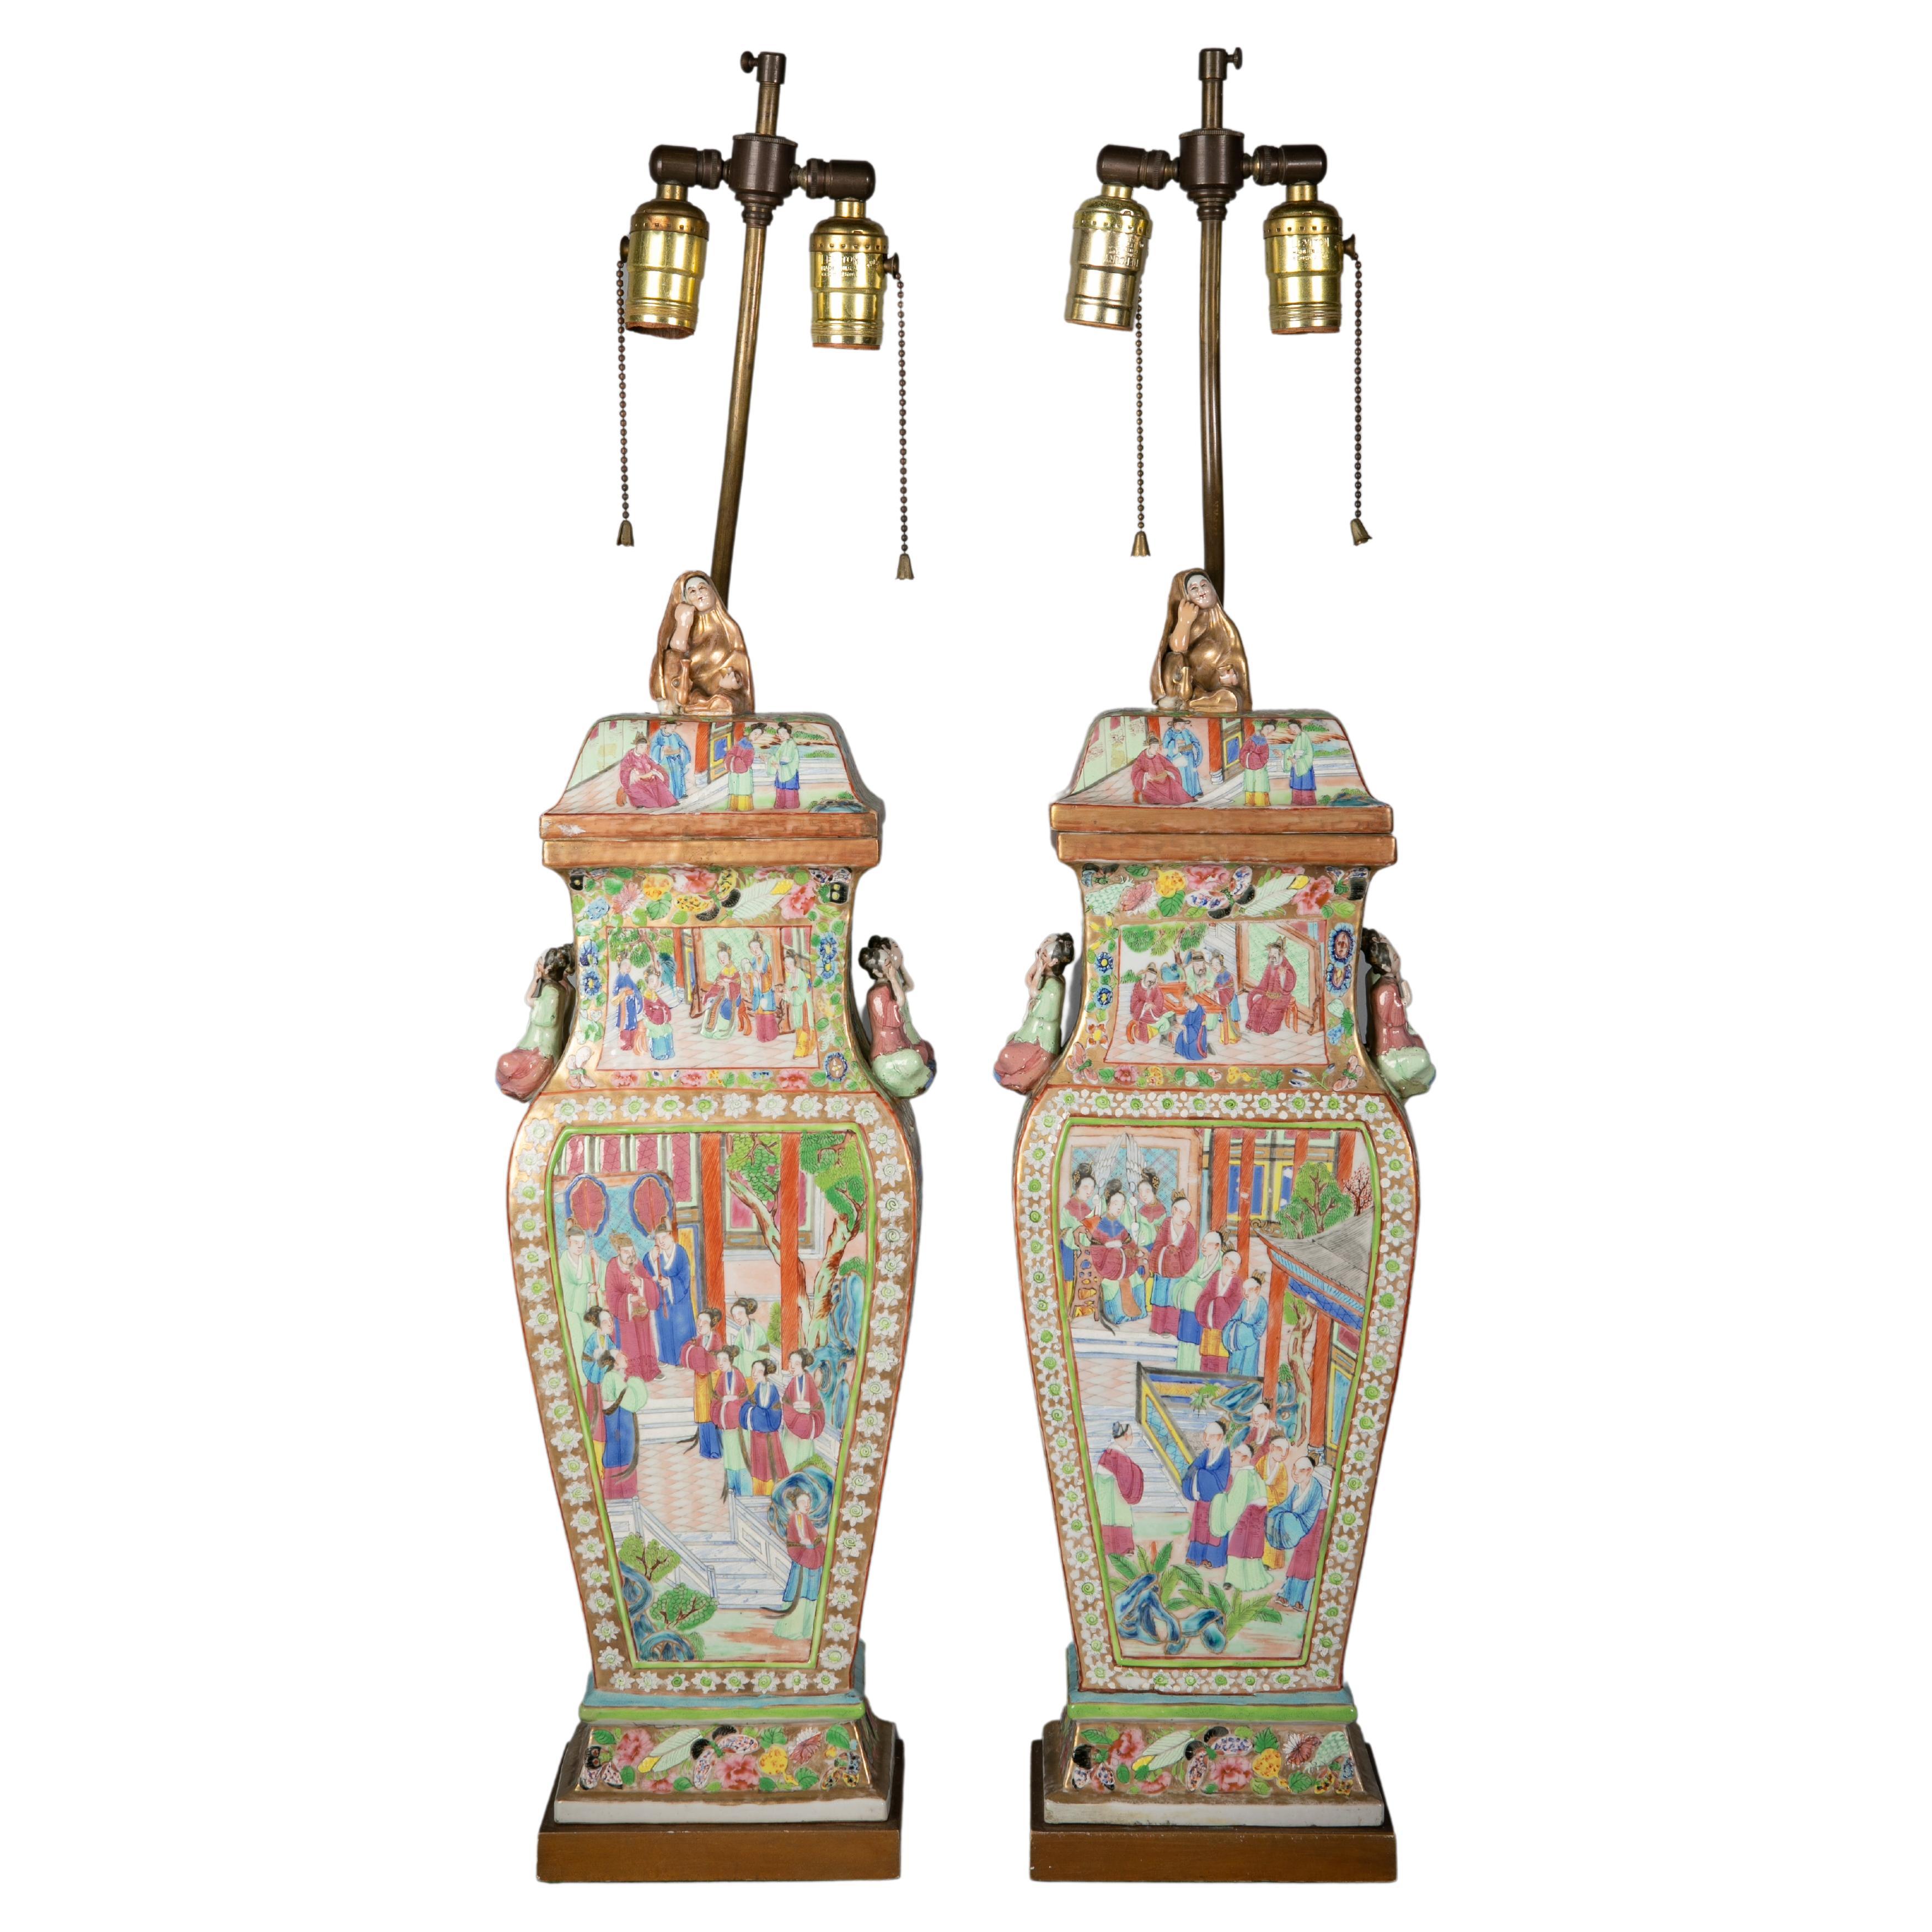 Pair of Fine Chinese Porcelain Rose Mandarin Covered Vases as Lamps, Circa 1840 For Sale